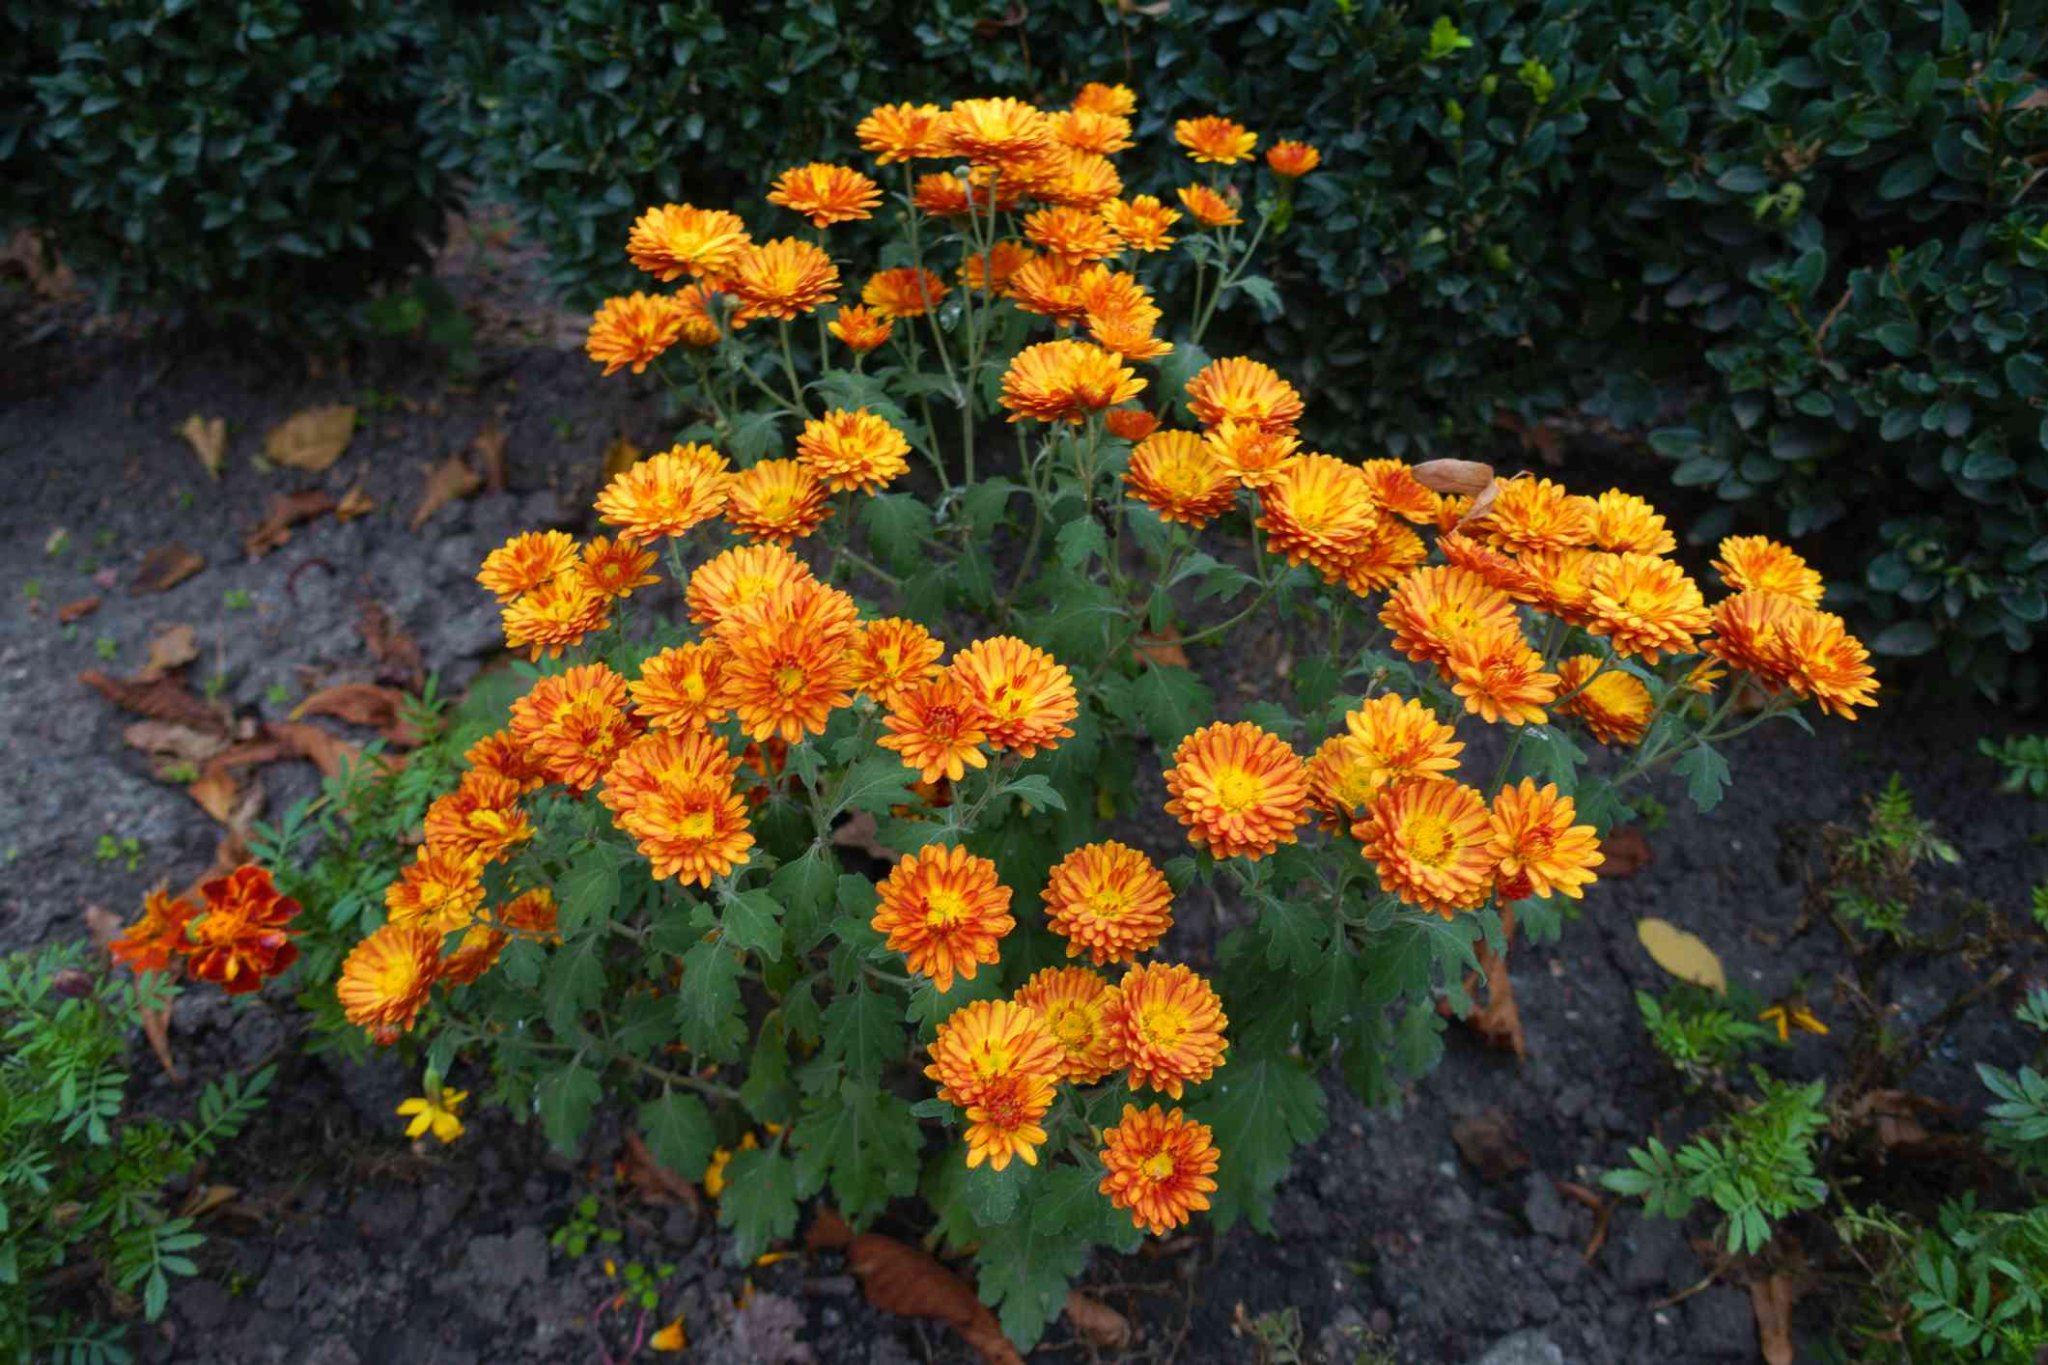 Mums Are Actually Perennial Plants—Here's How to Take Care of Them